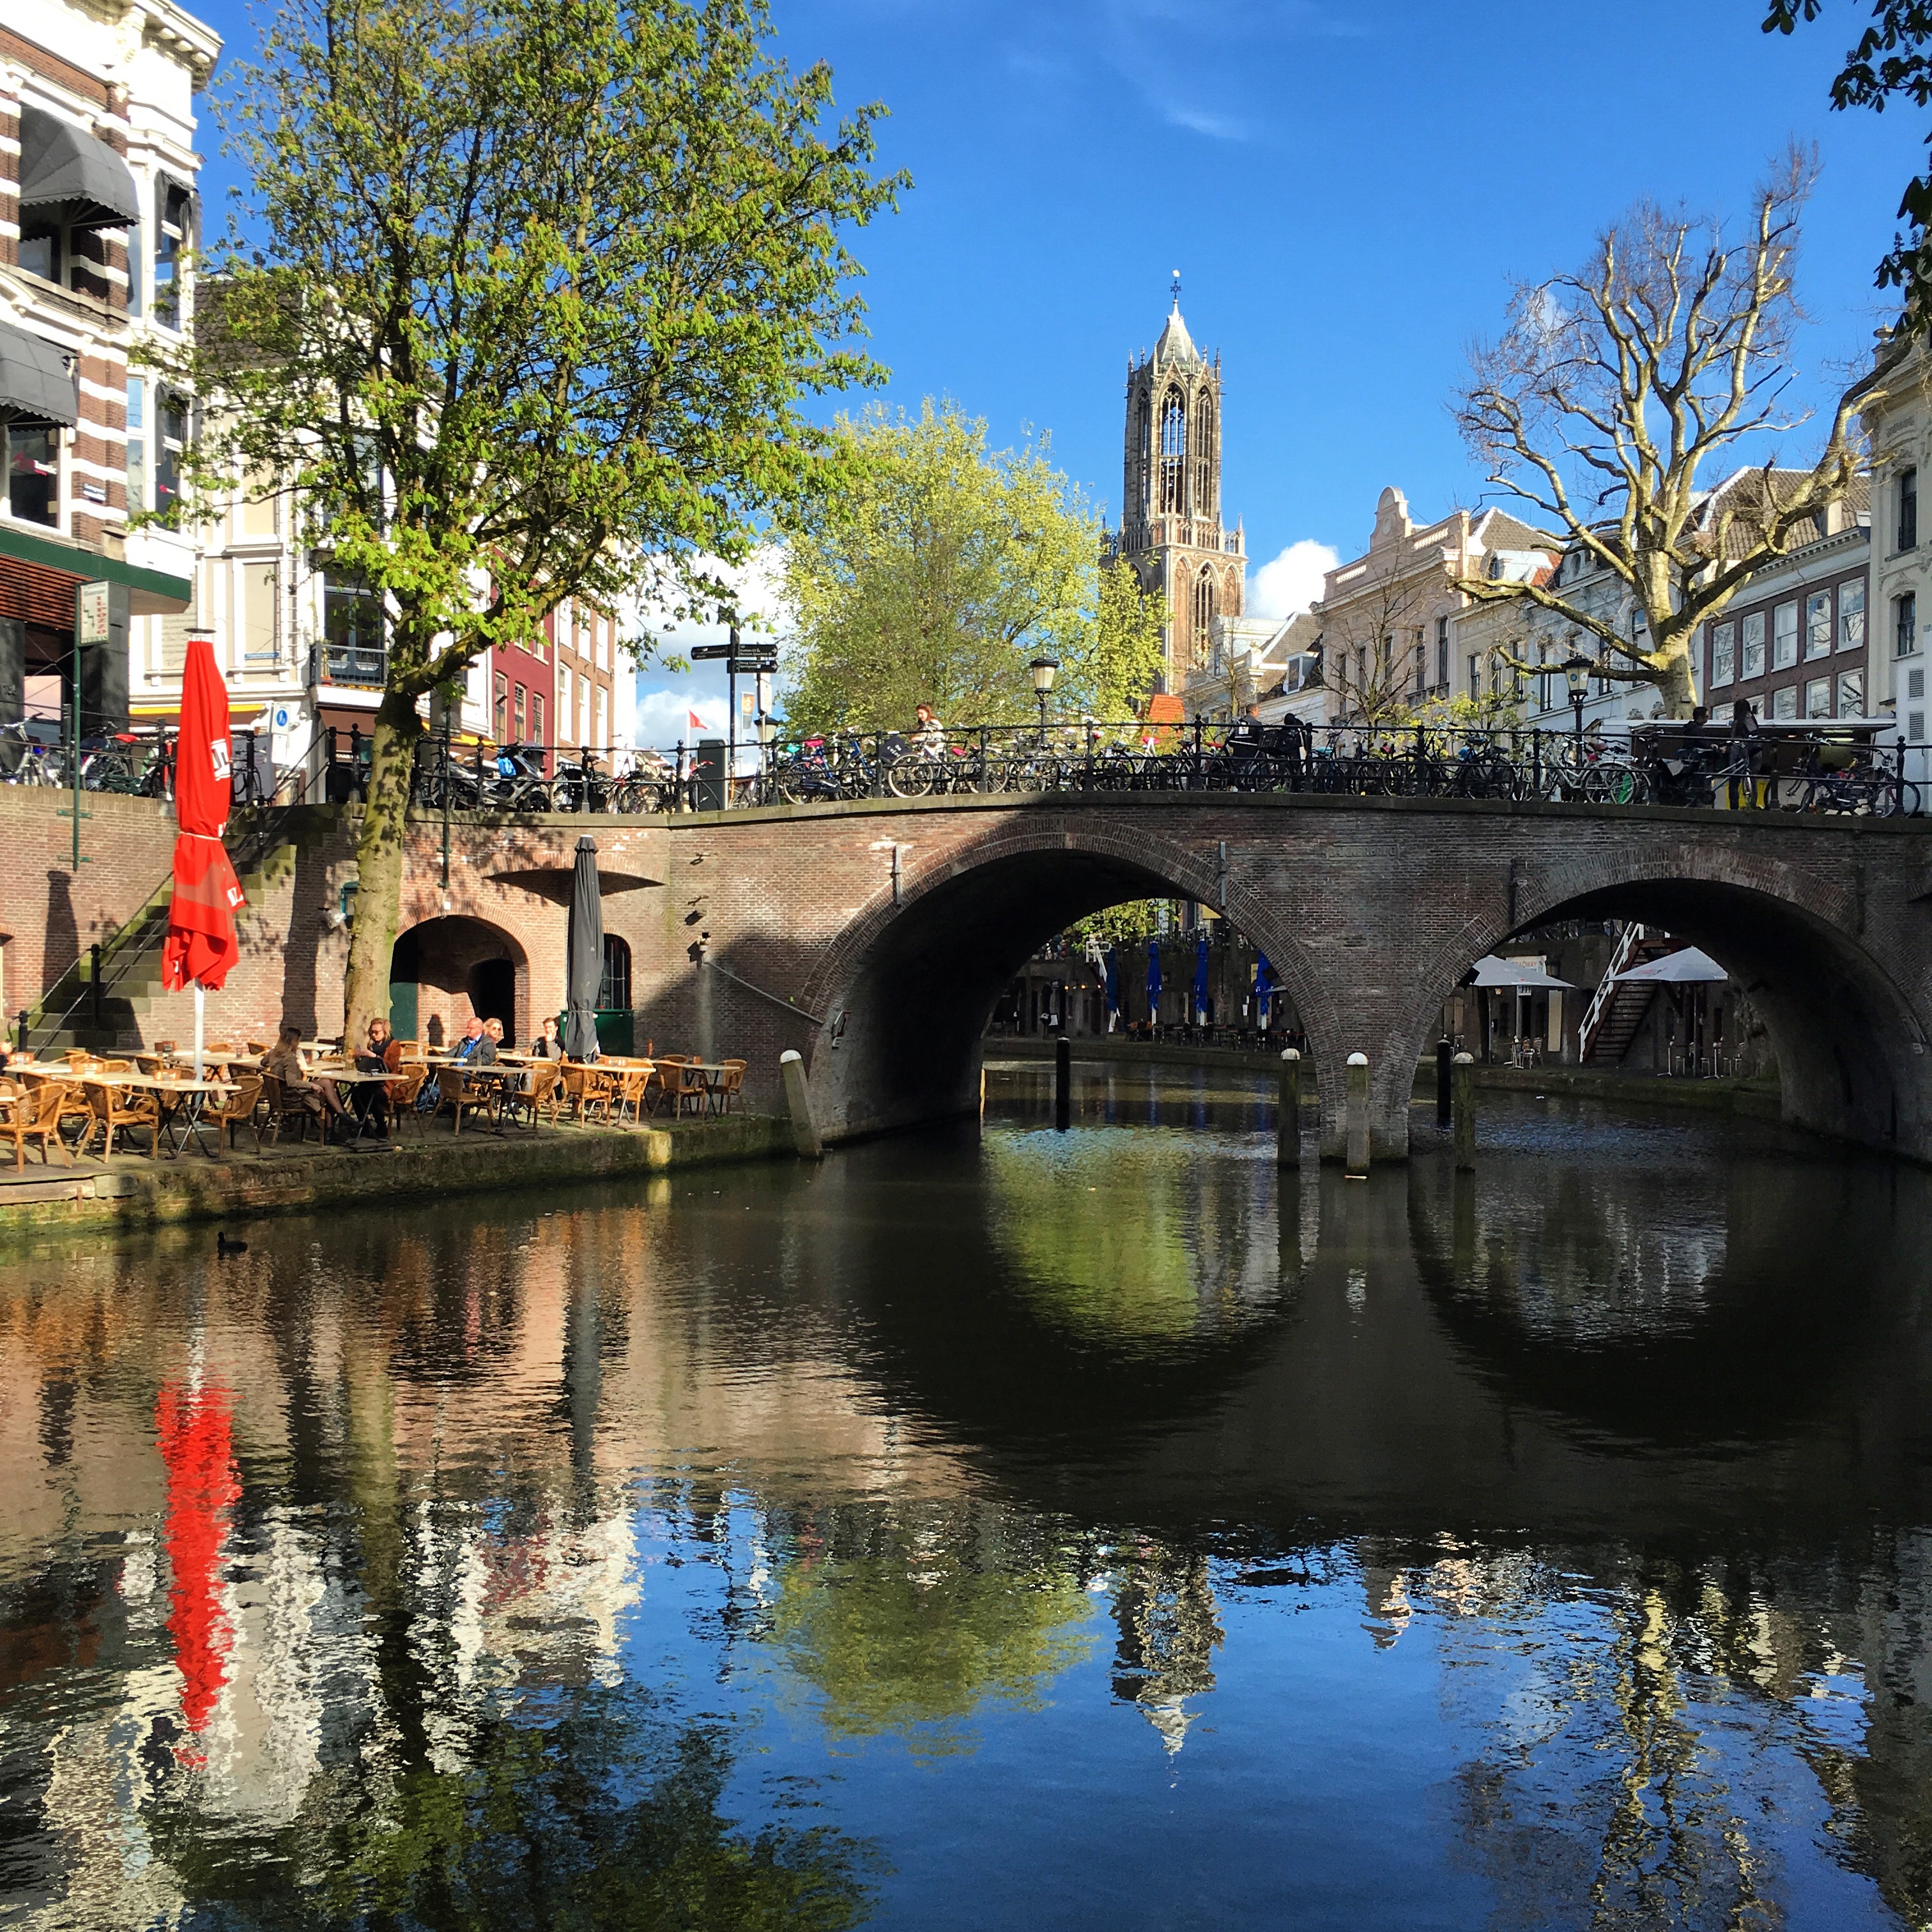 21 places to visit in the Netherlands (that aren’t